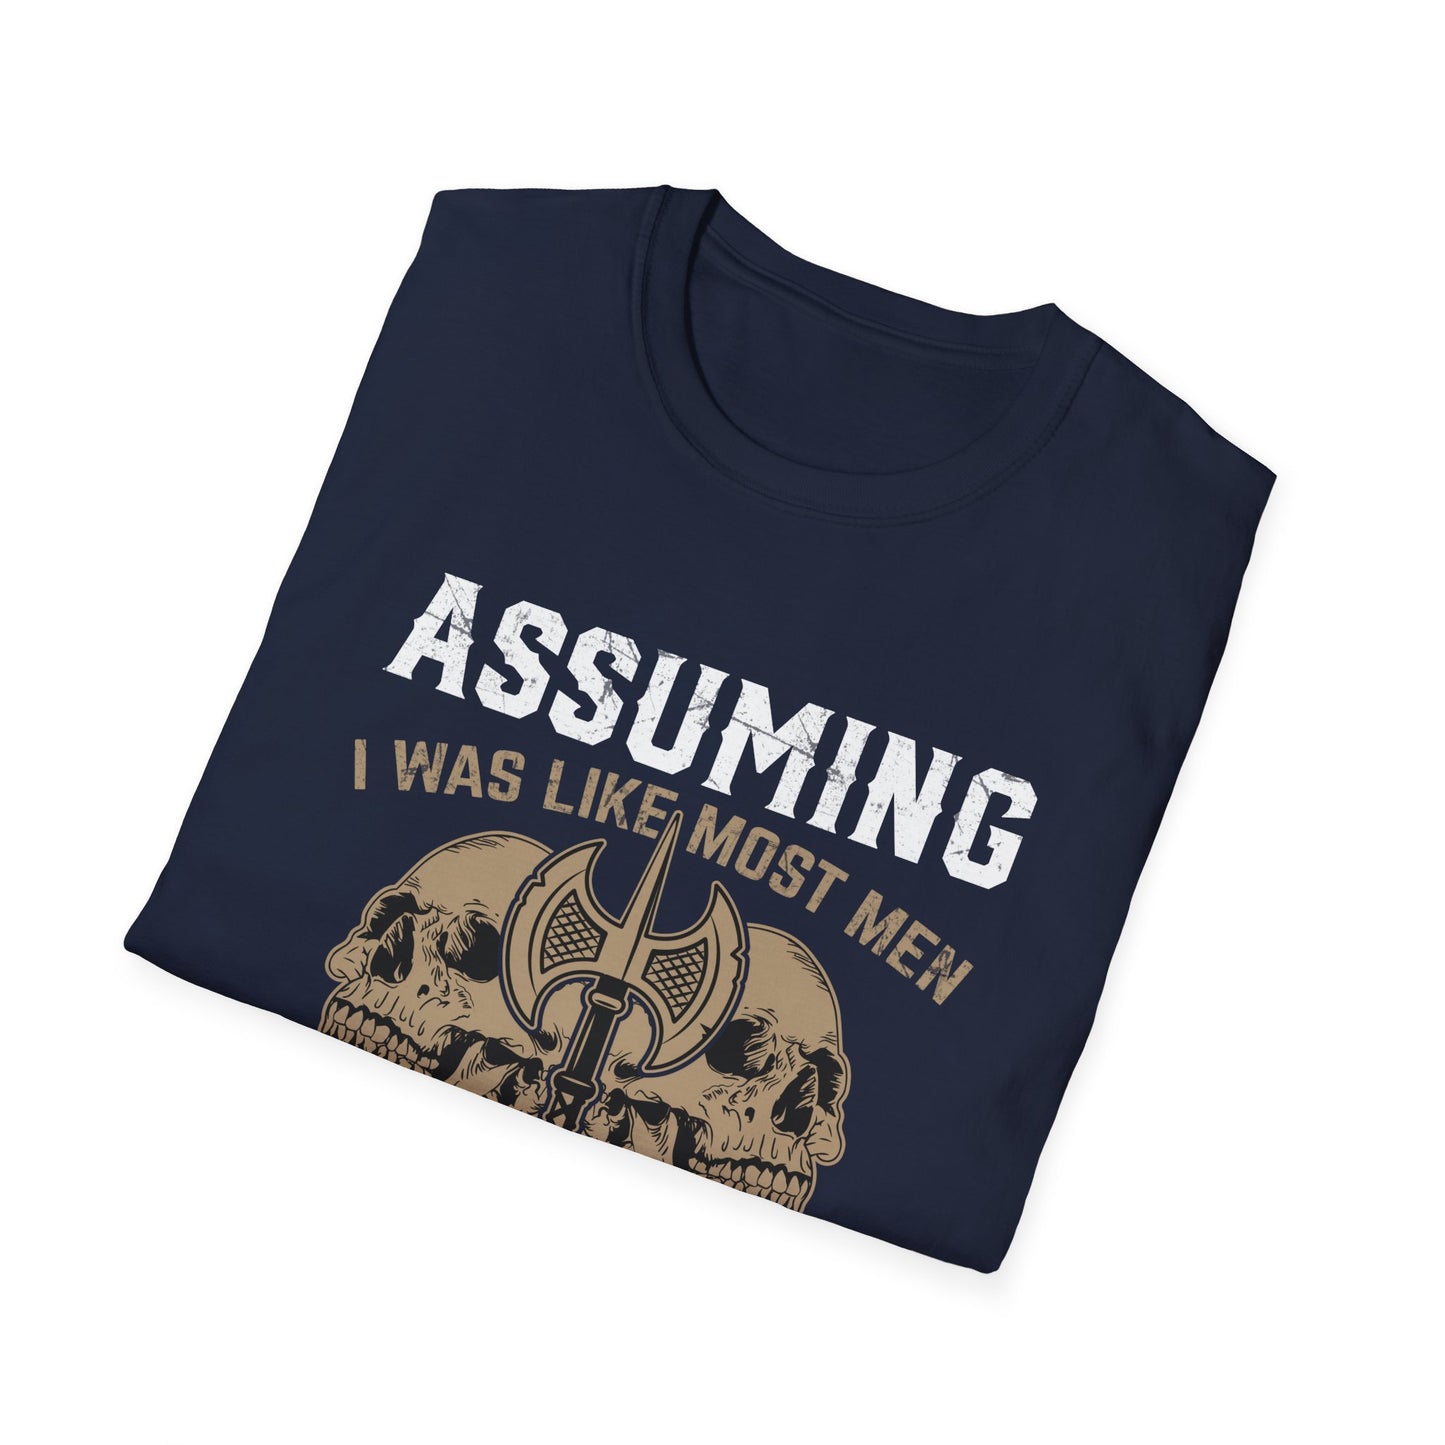 Assuming I Was Like Most Men Was Your First Mistake I Am A Viking T-Shirt